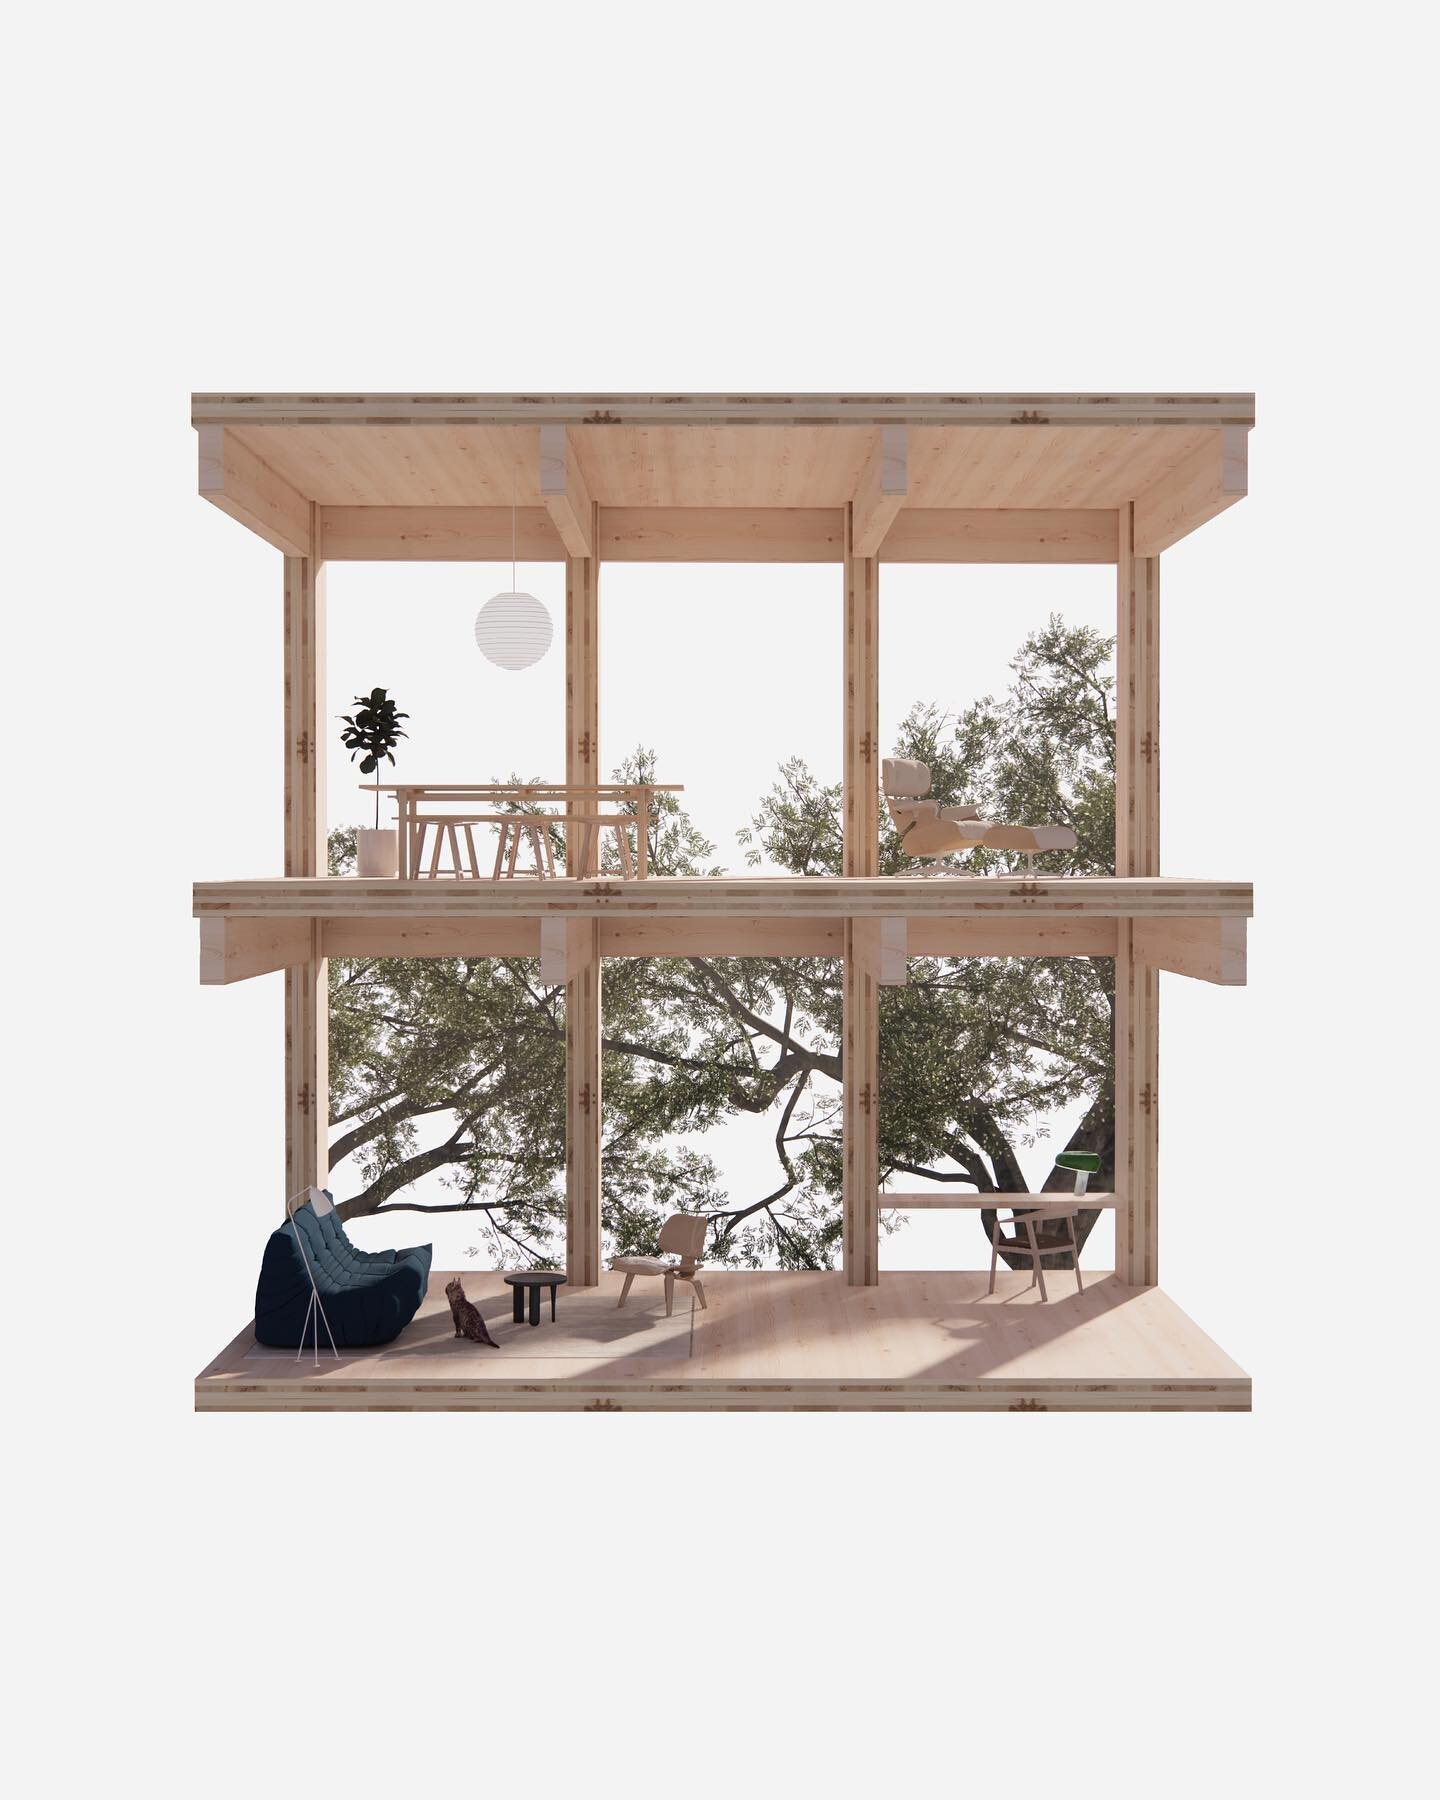 #forwardstudio 
Topic: Mass Timber 

Timber is about to take over our homes, buildings and even skyscrapers in a new and beautiful way. Mass Timber (appropriately short for &ldquo;massive timber&rdquo;) is a structural concept that essentially involv